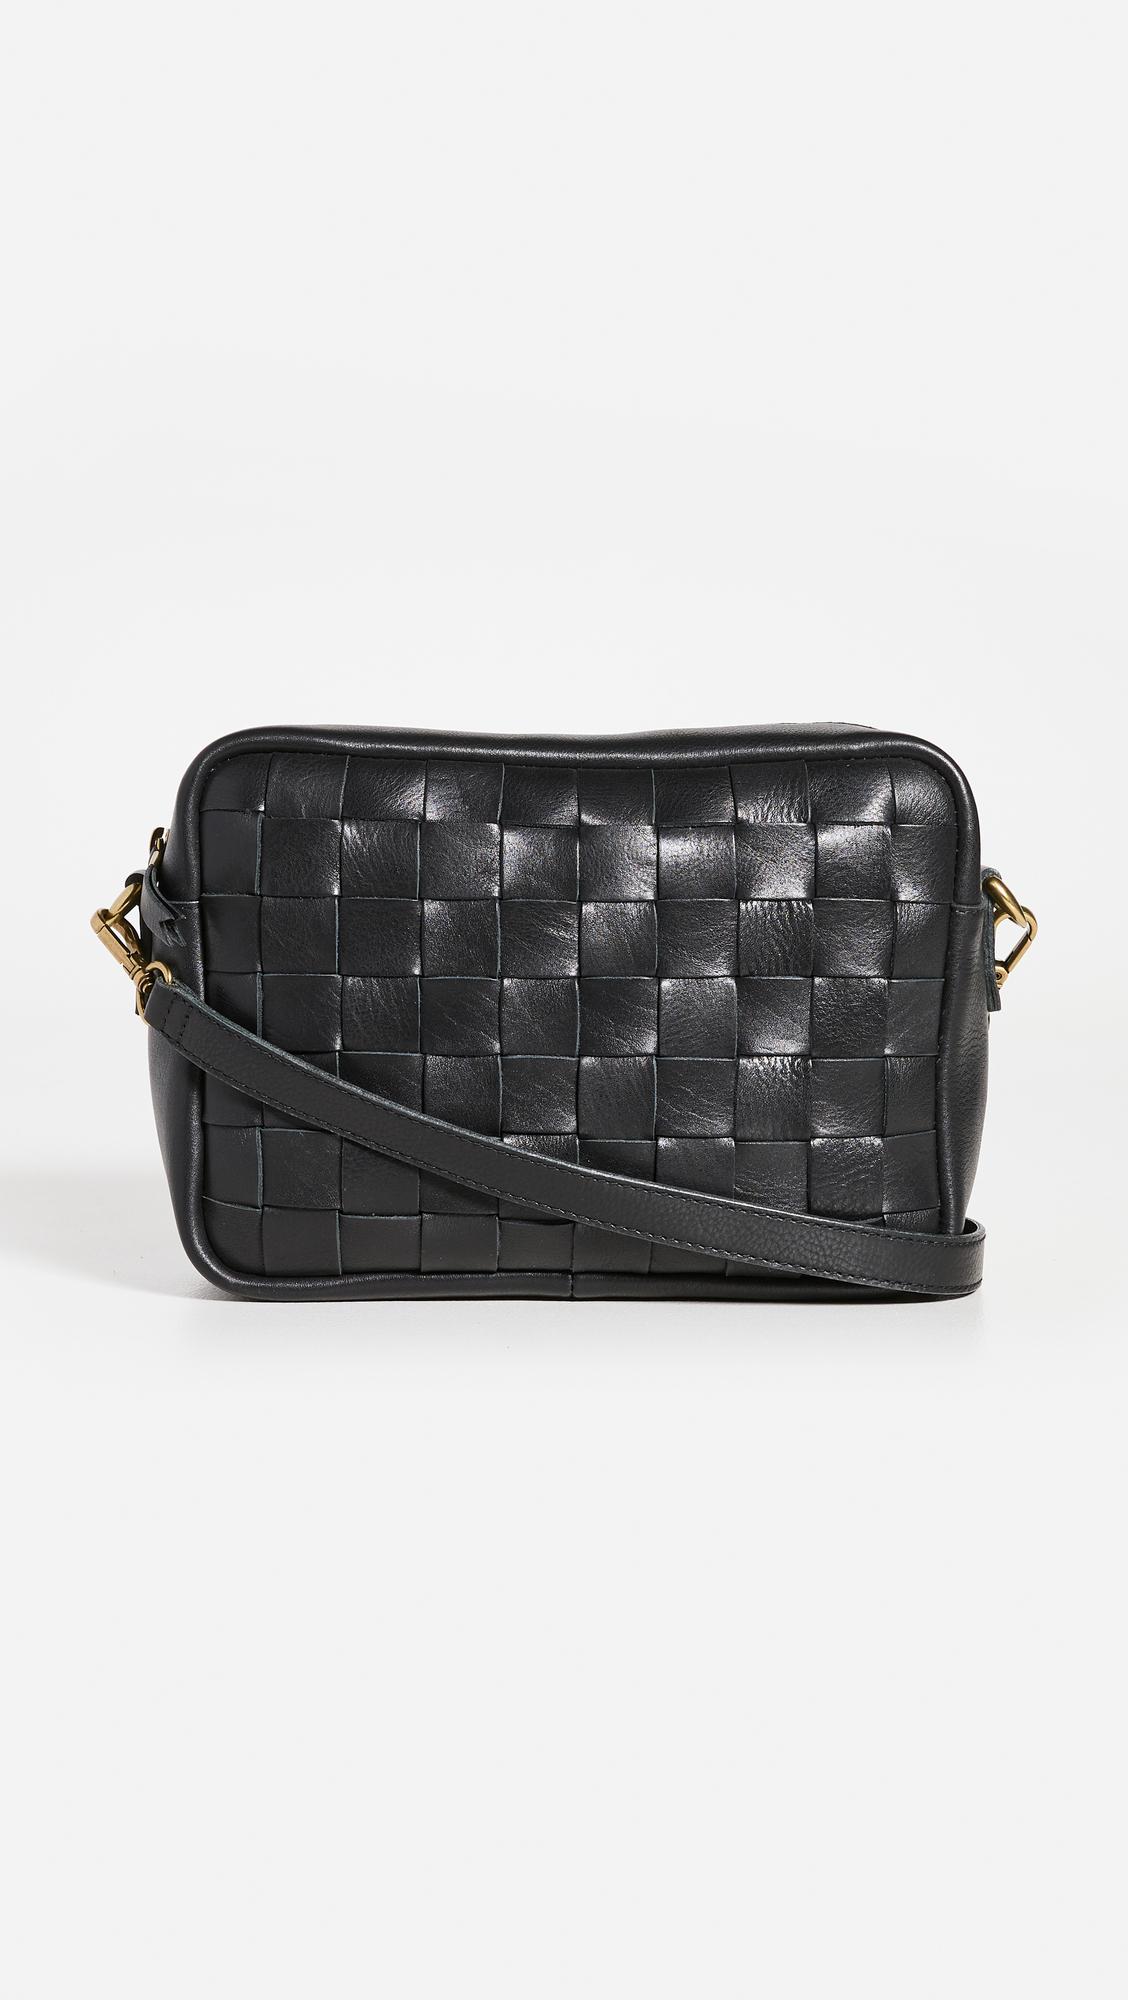 Madewell The Large Transport Camera Bag: Woven Edition in Black | Lyst